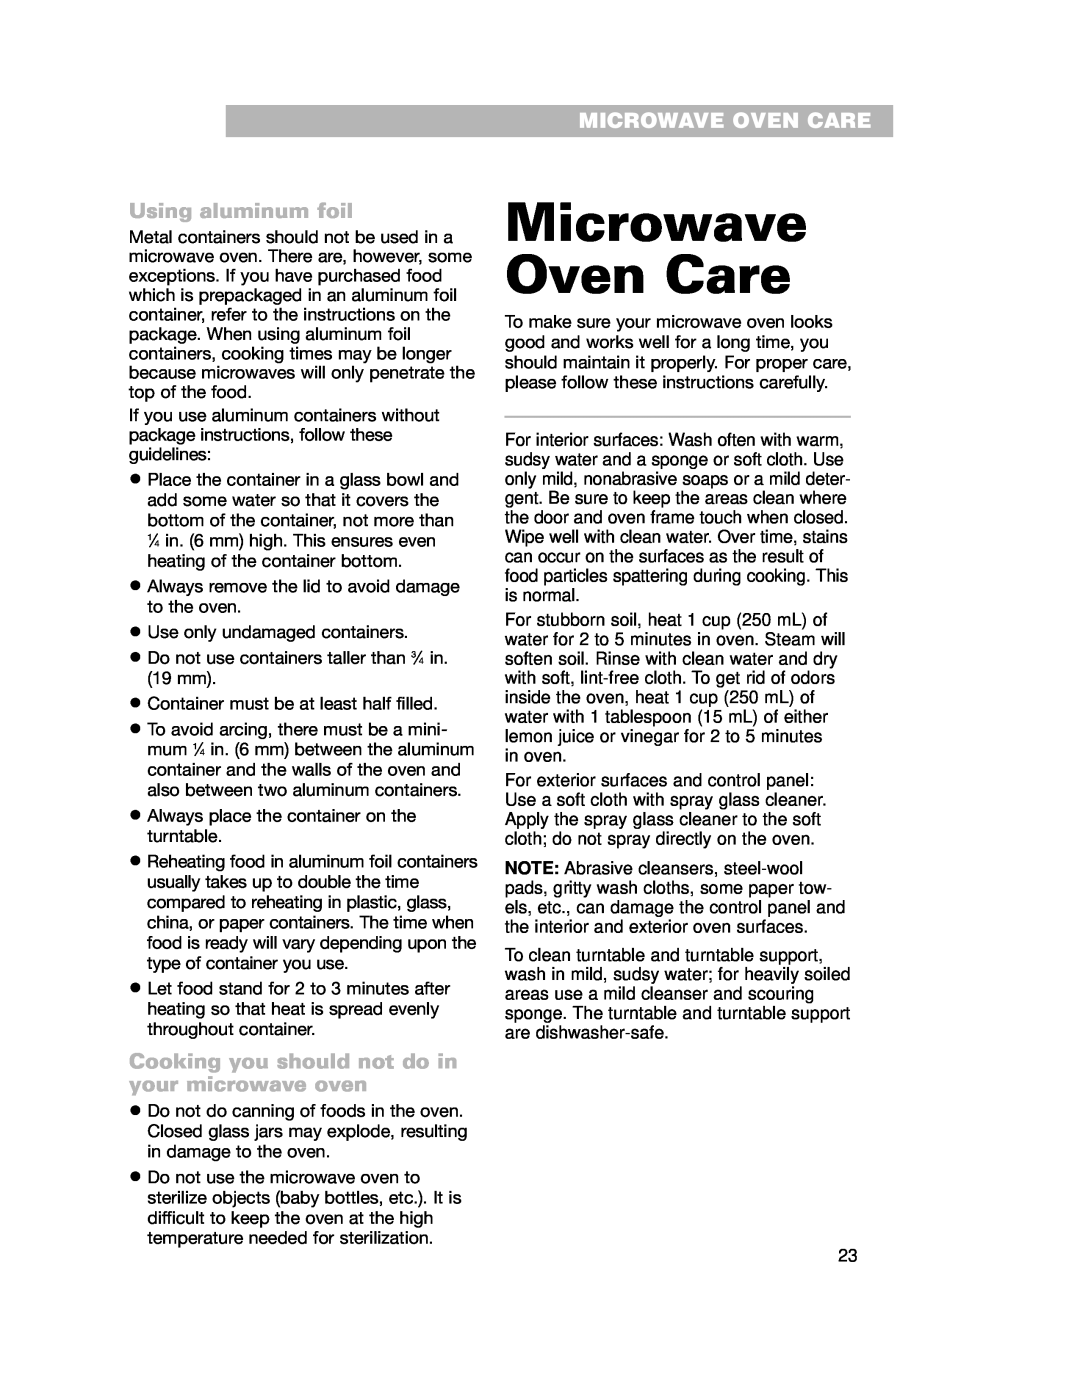 Whirlpool GH7155XKQ Microwave Oven Care, Using aluminum foil, Cooking you should not do in your microwave oven 